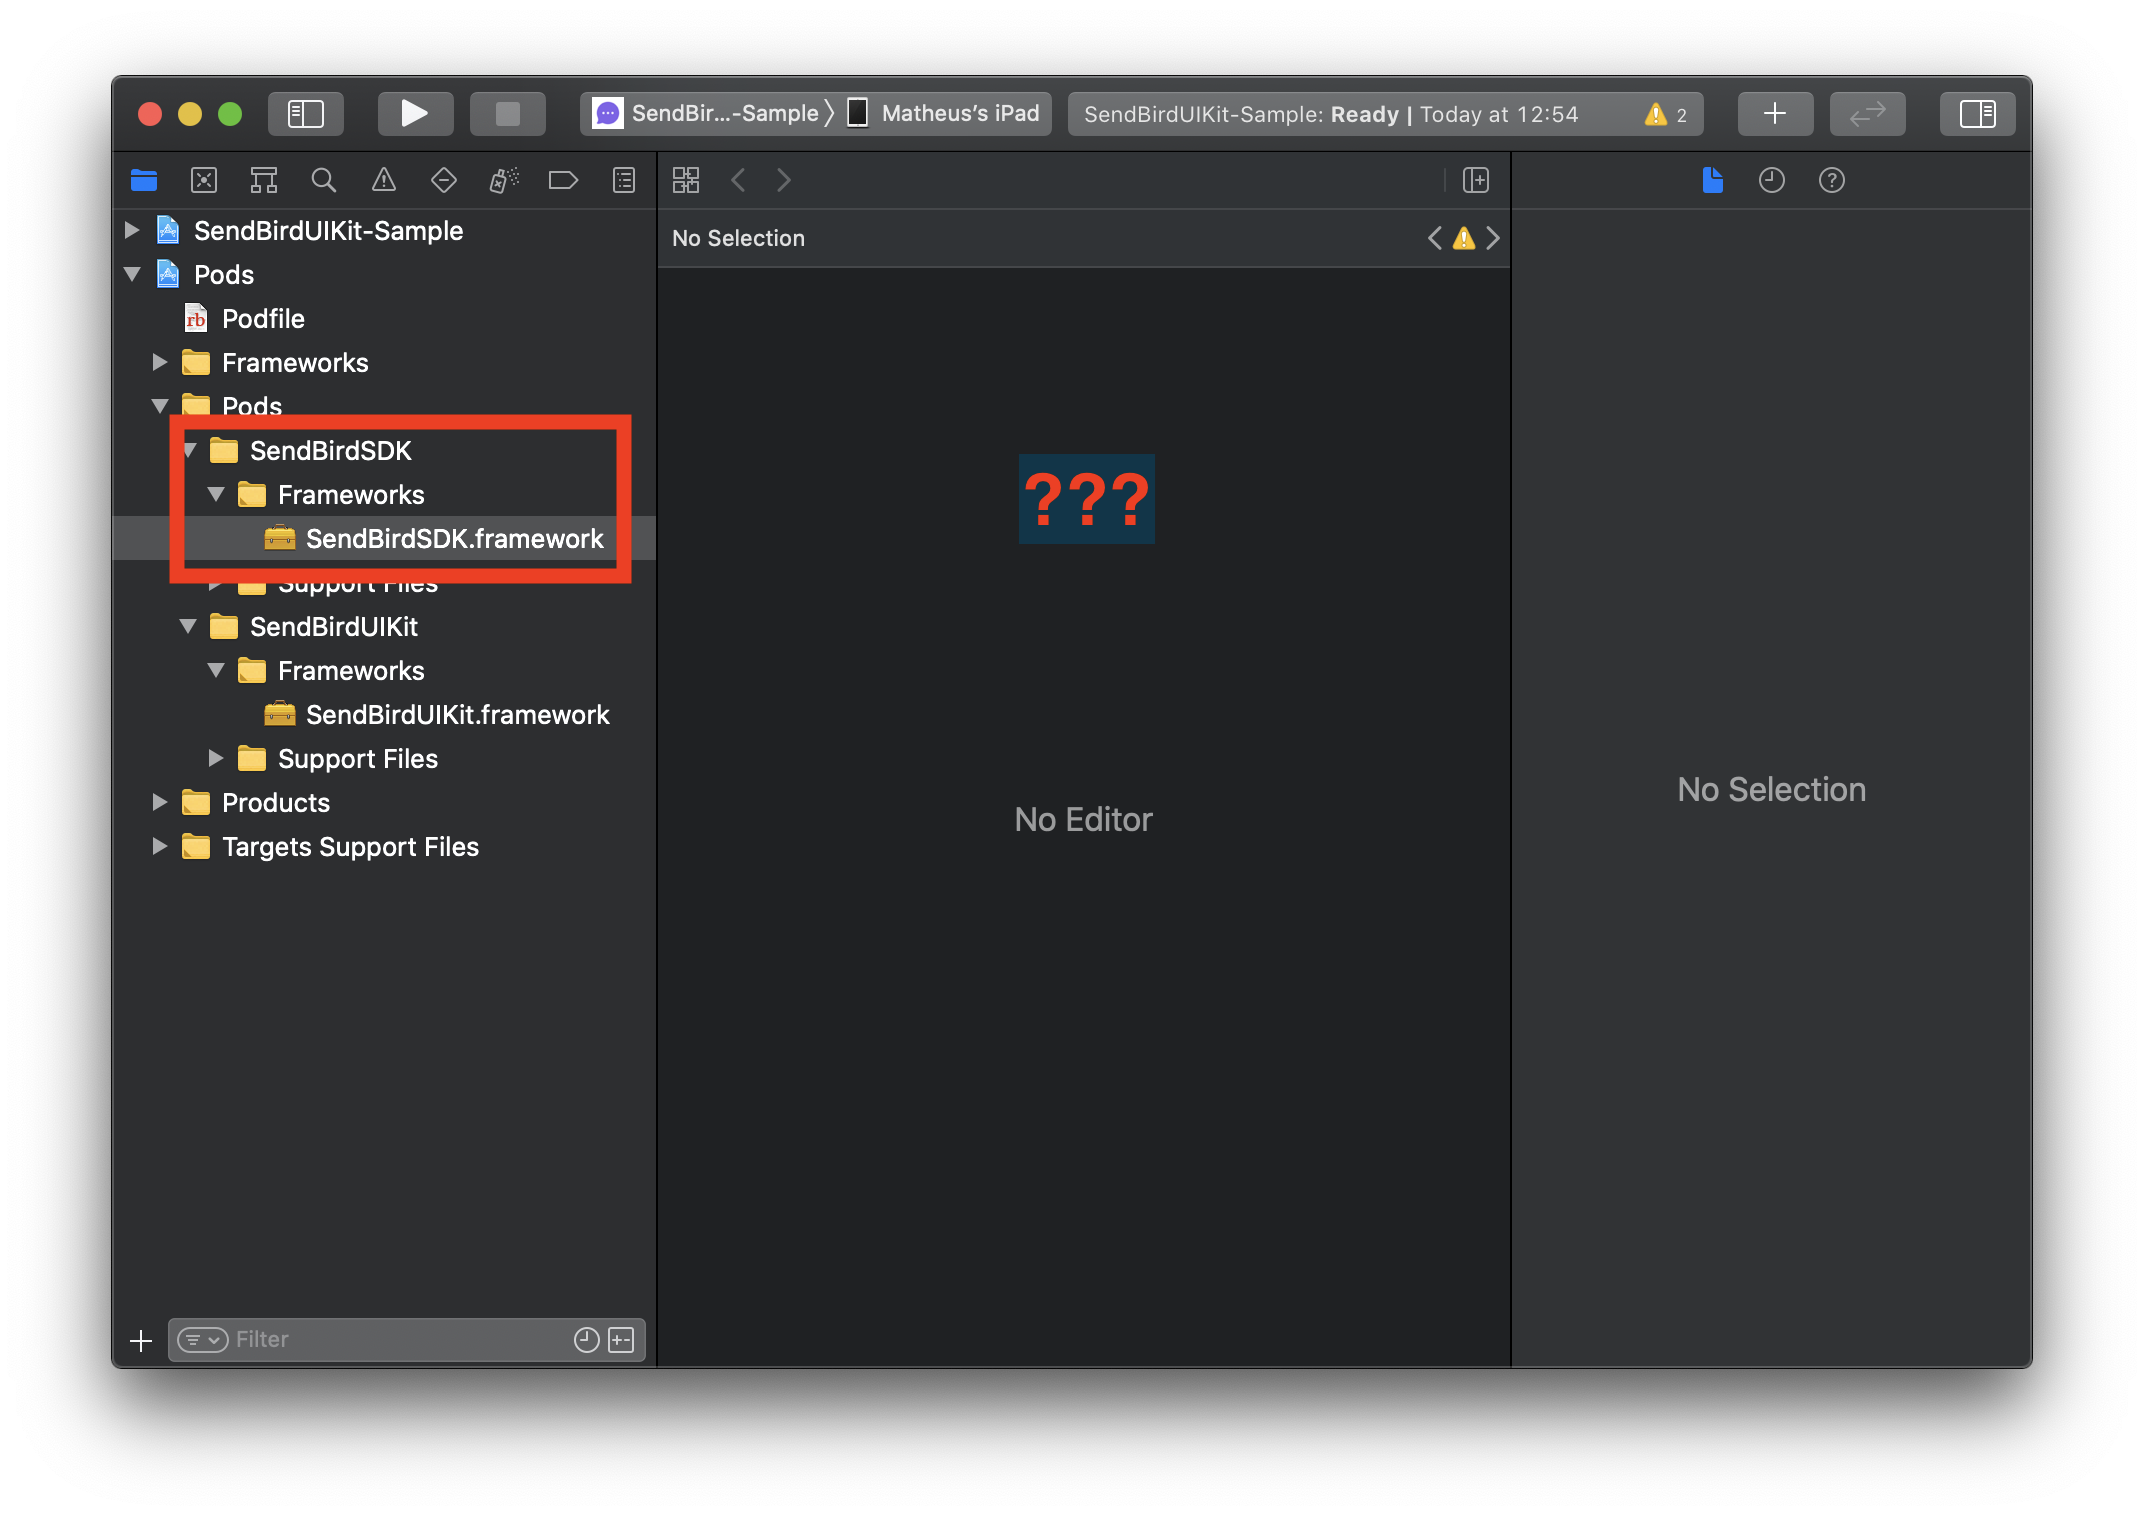 Image shows an Xcode window selecting a .xcframework without any other info or code available